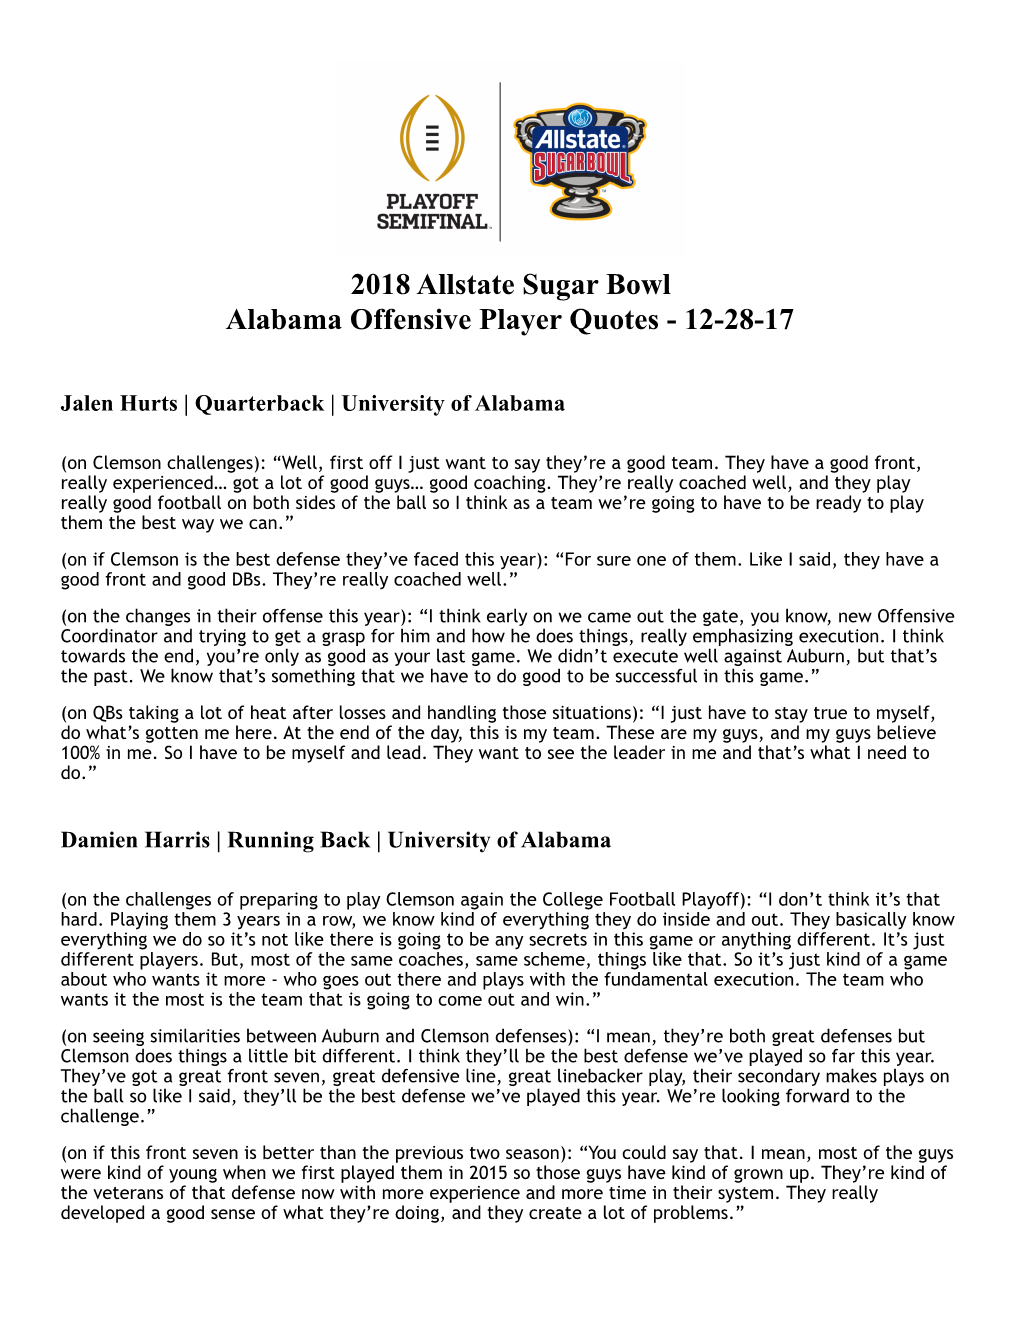 Alabama Offensive Player Quotes - 12-28-17